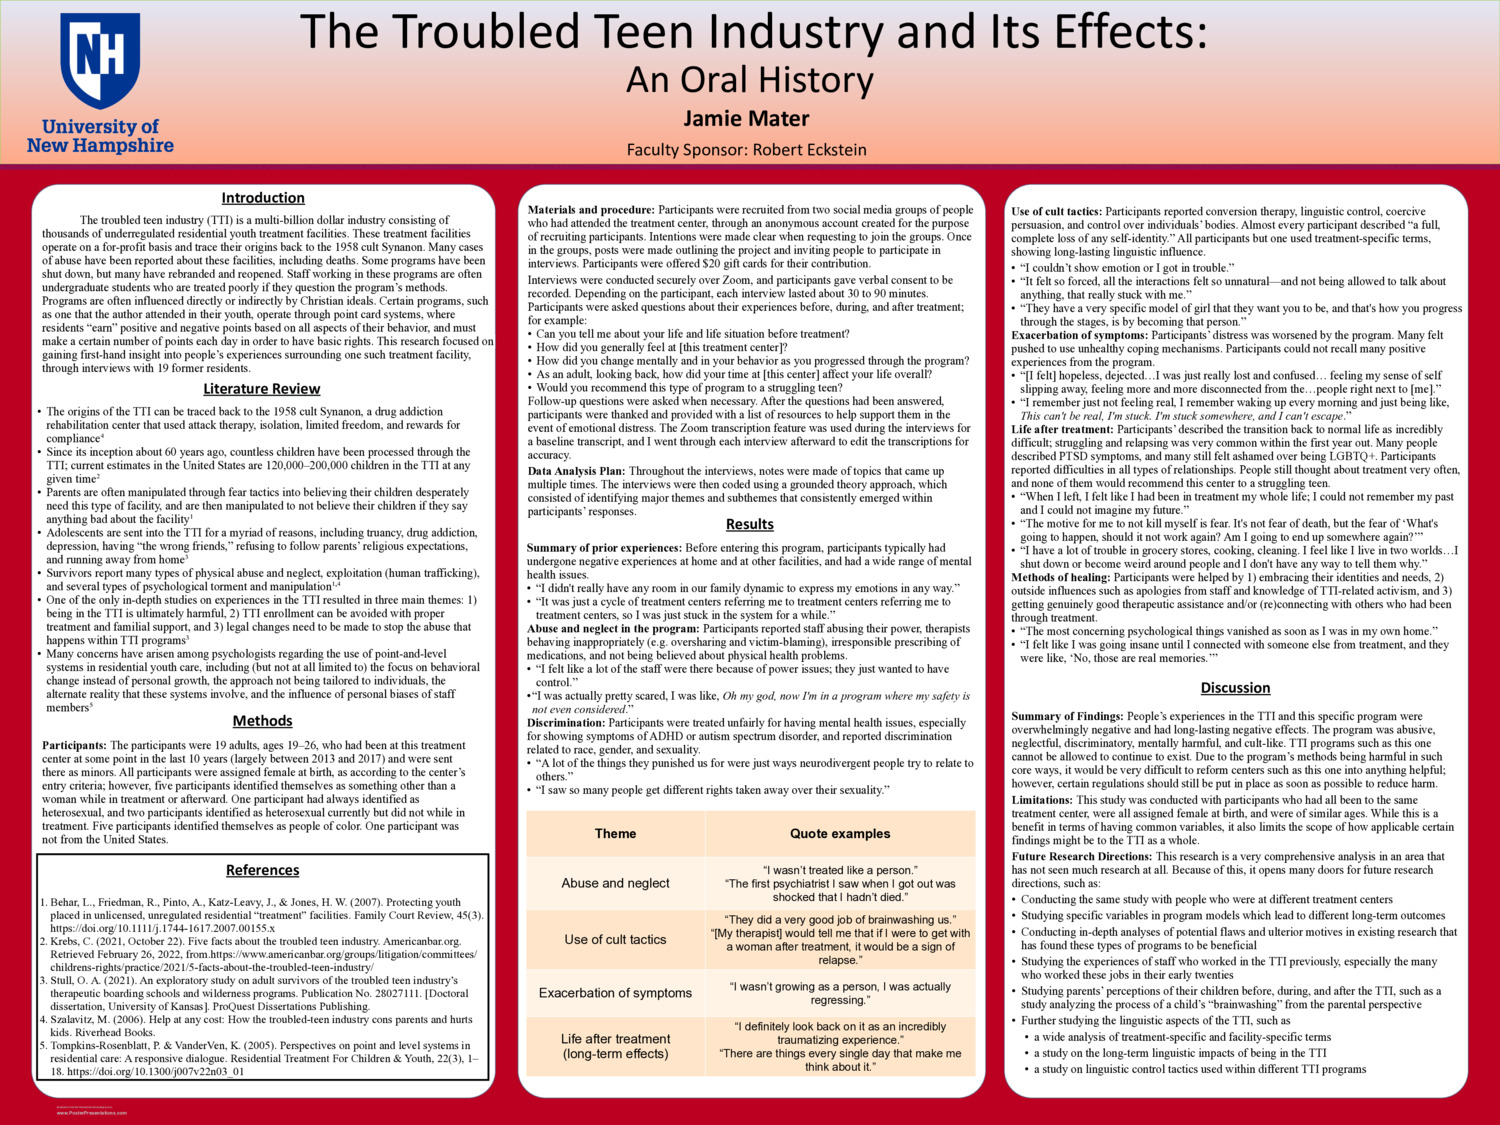 The Troubled Teen Industry And Its Effects by JamieM645